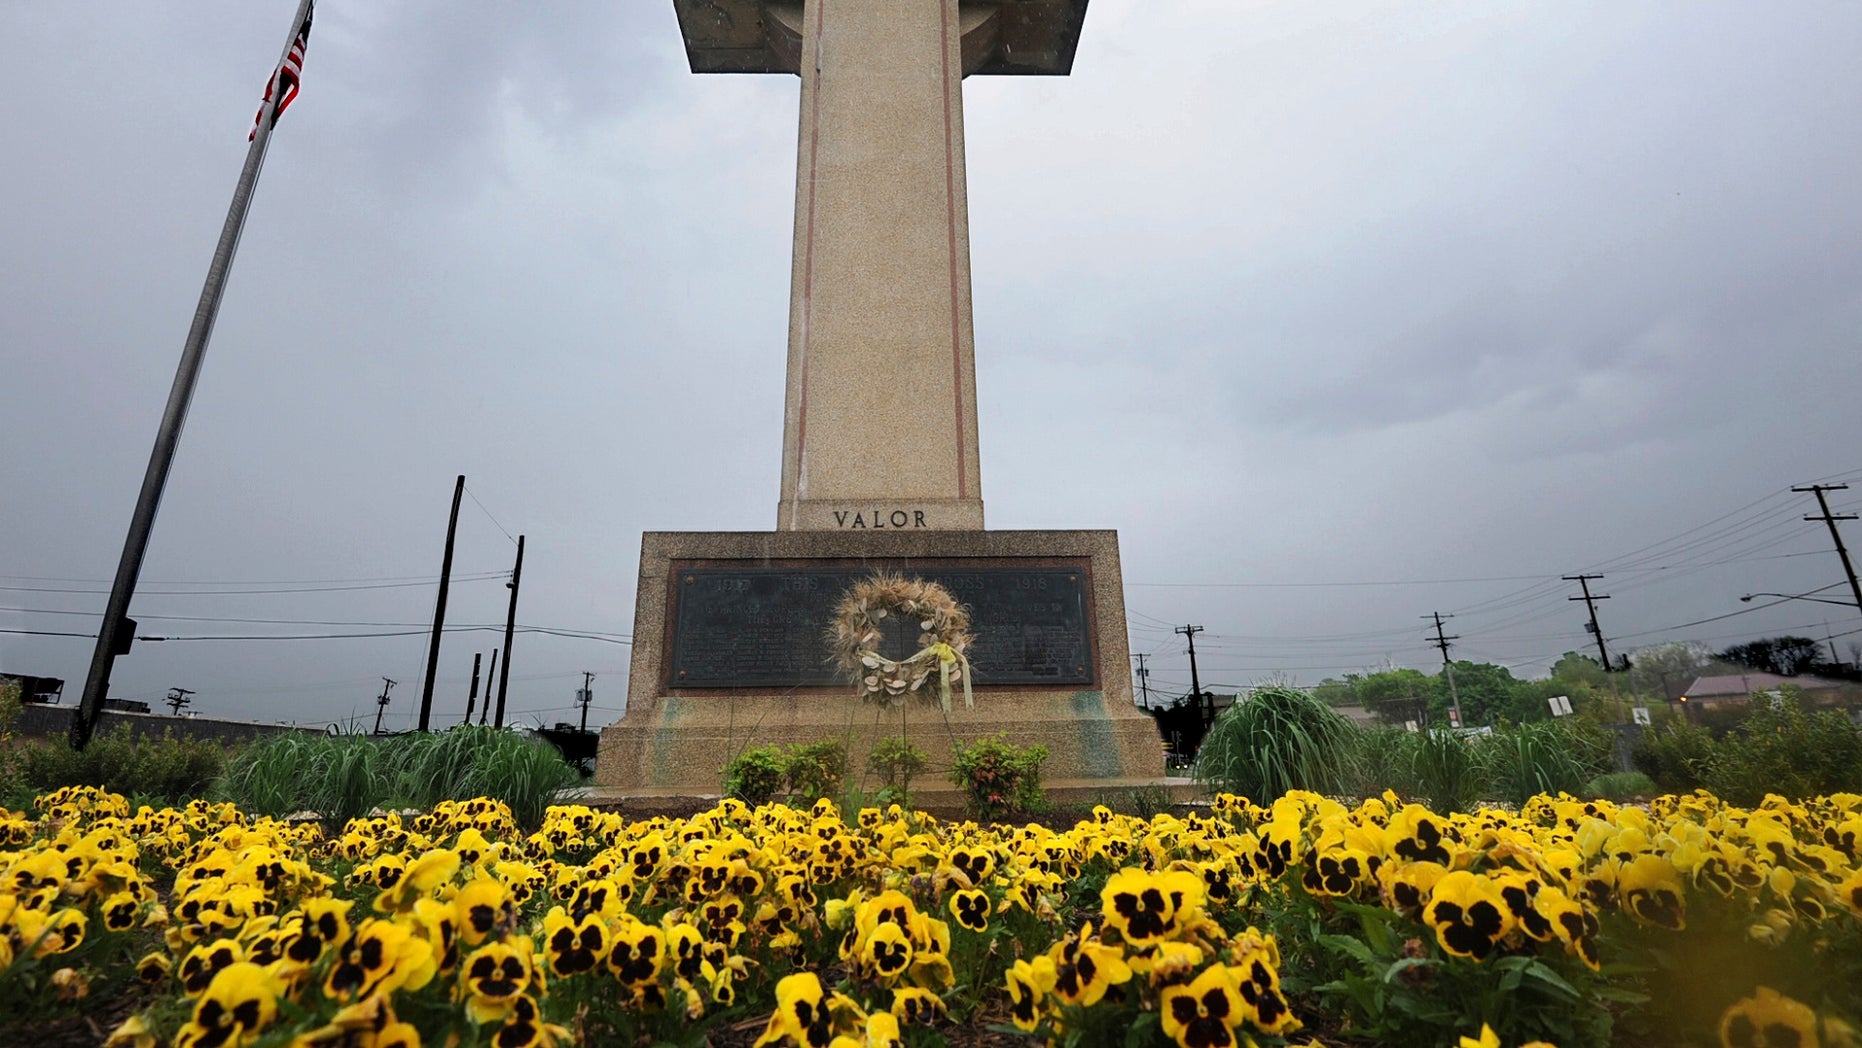 The case regarding whether or not a Maryland war memorial in the shape of a cross goes against the separation of church and state was accepted for final review by Supreme Court justices on Friday. (Algerina Perna /The Baltimore Sun via AP, File)